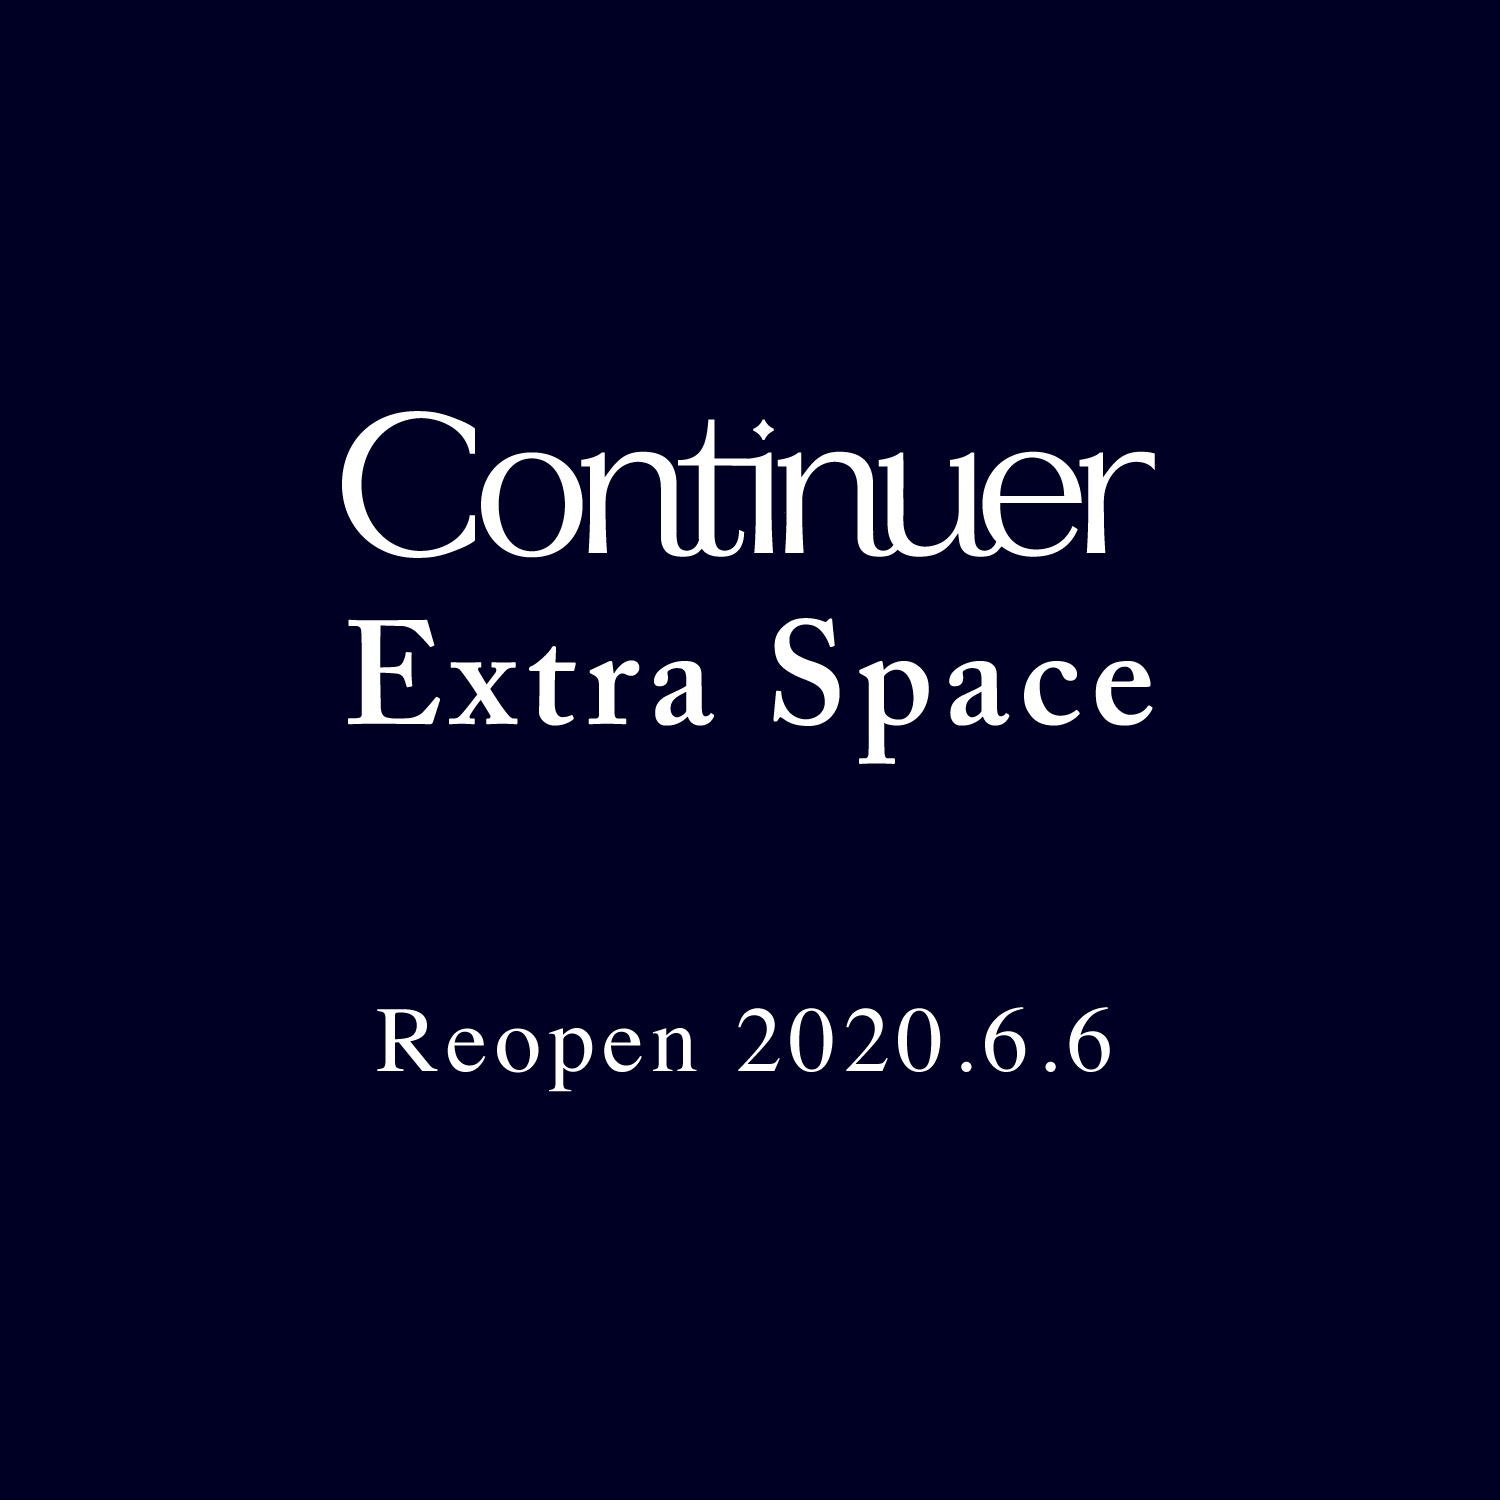 Continuer Extra Space 営業再開のお知らせ